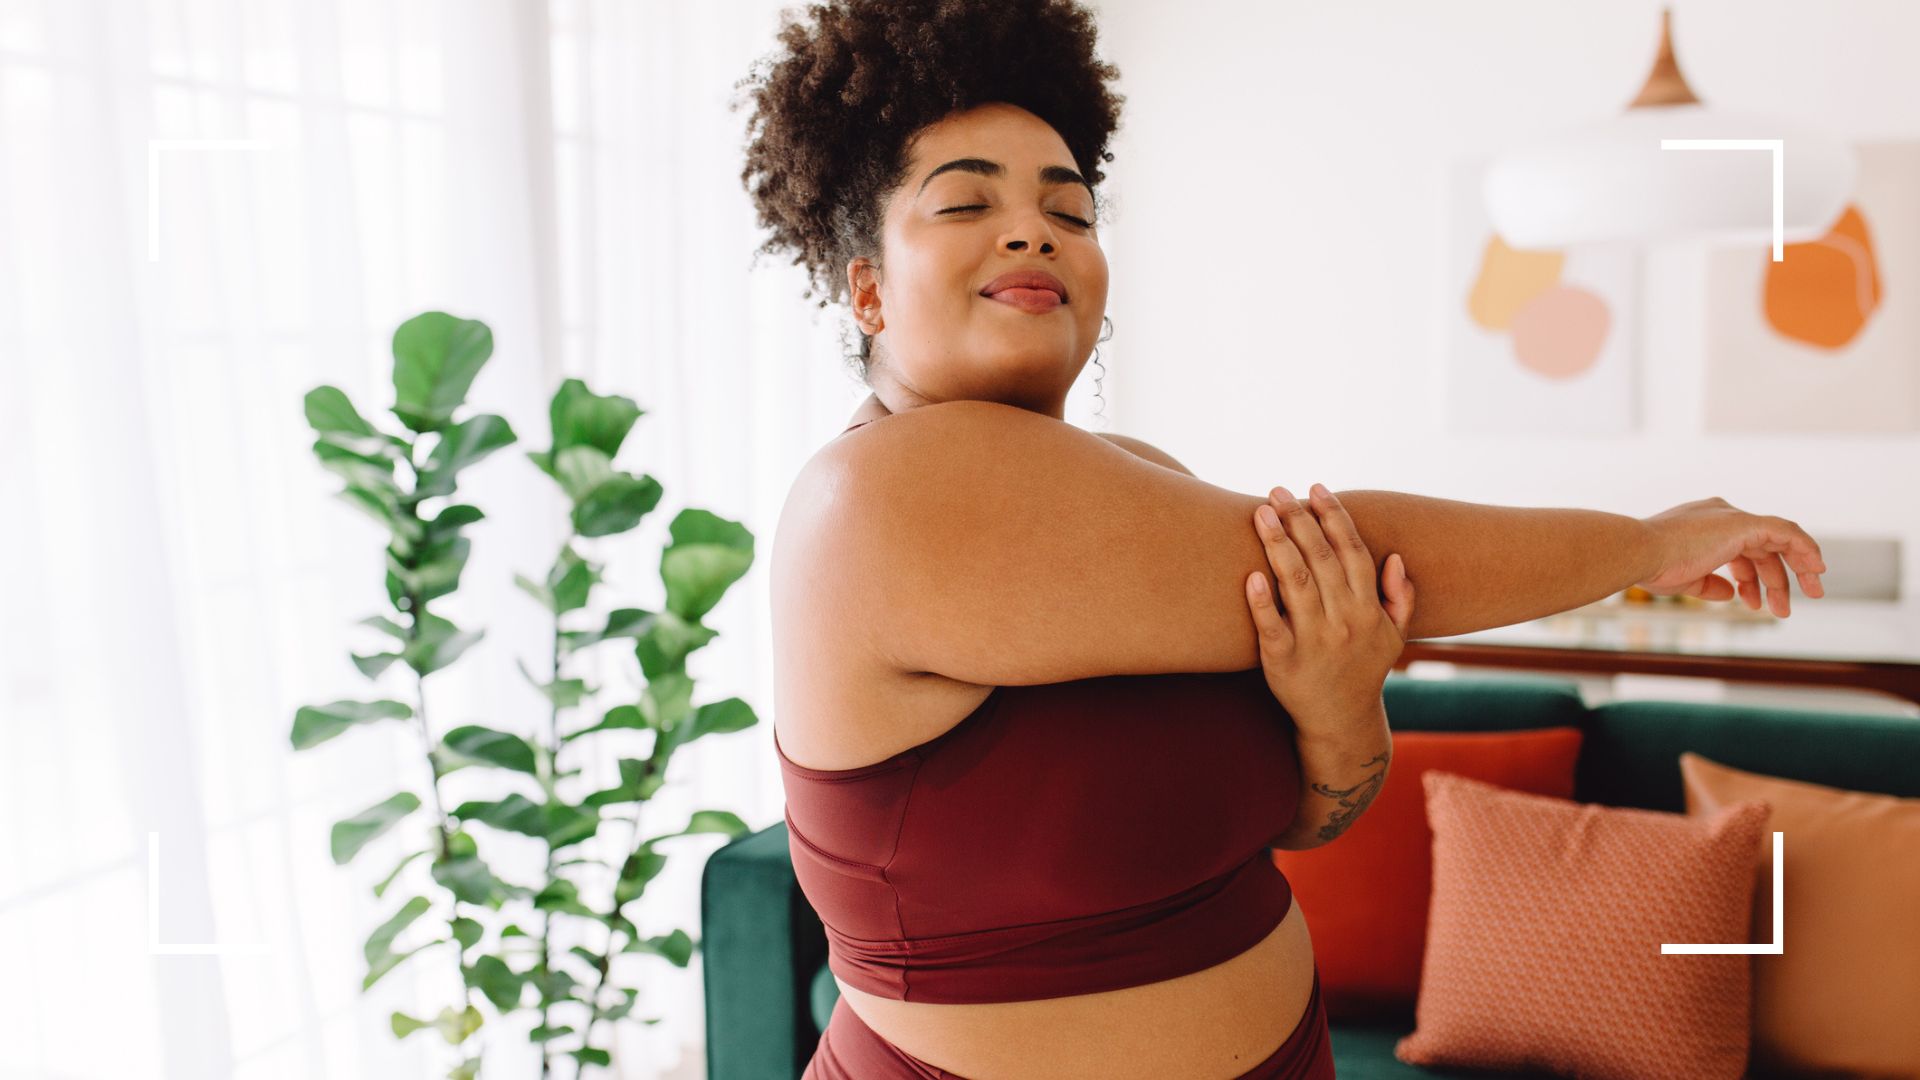 What You Can Do to Transform Your Body Confidence